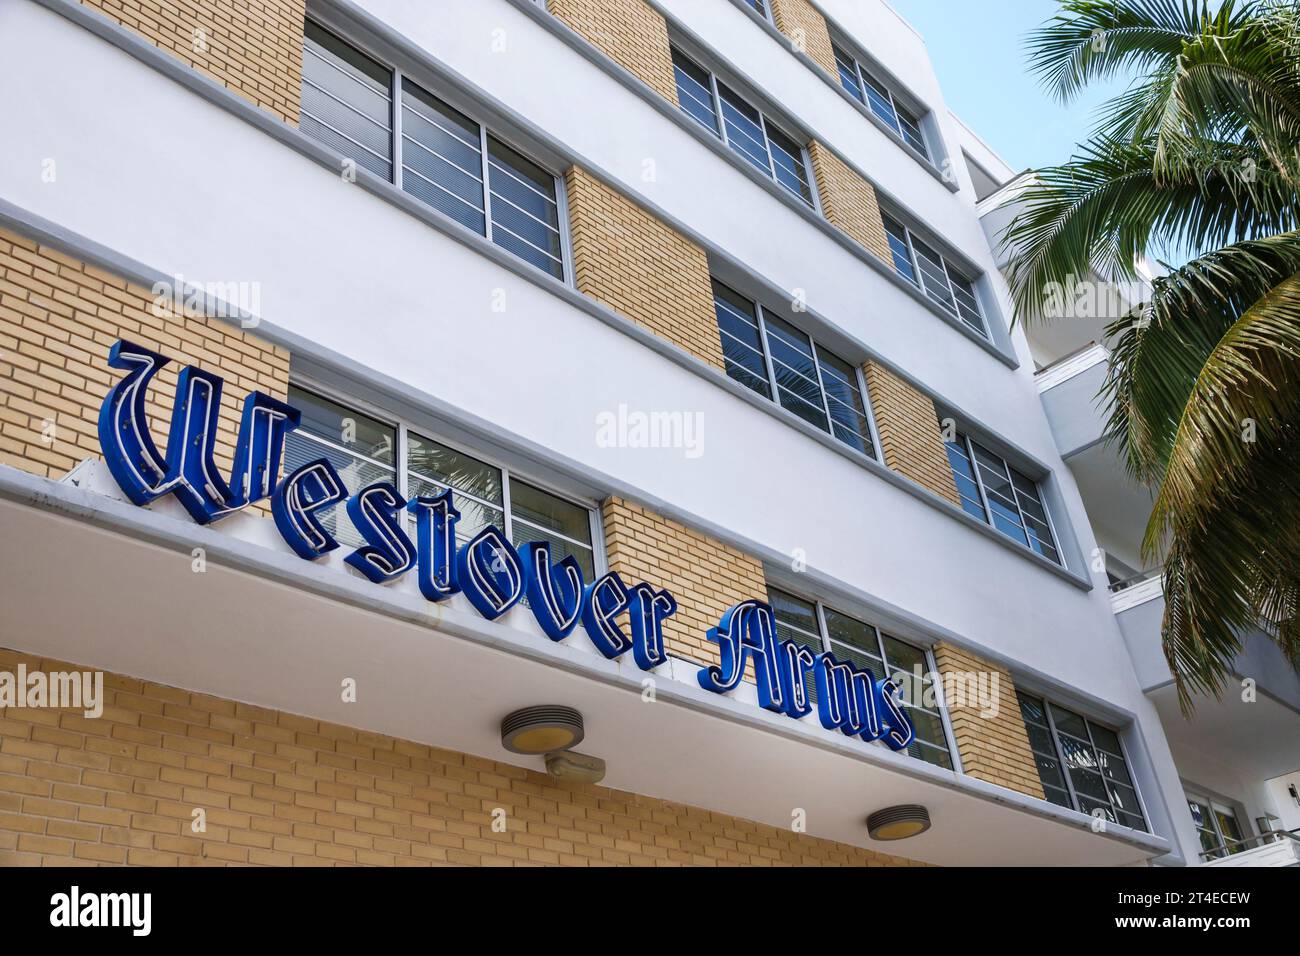 Miami Beach Florida,outside exterior,building front entrance hotel,Collins Avenue,Westover Arms Hotel sign,hotels motels businesses Stock Photo